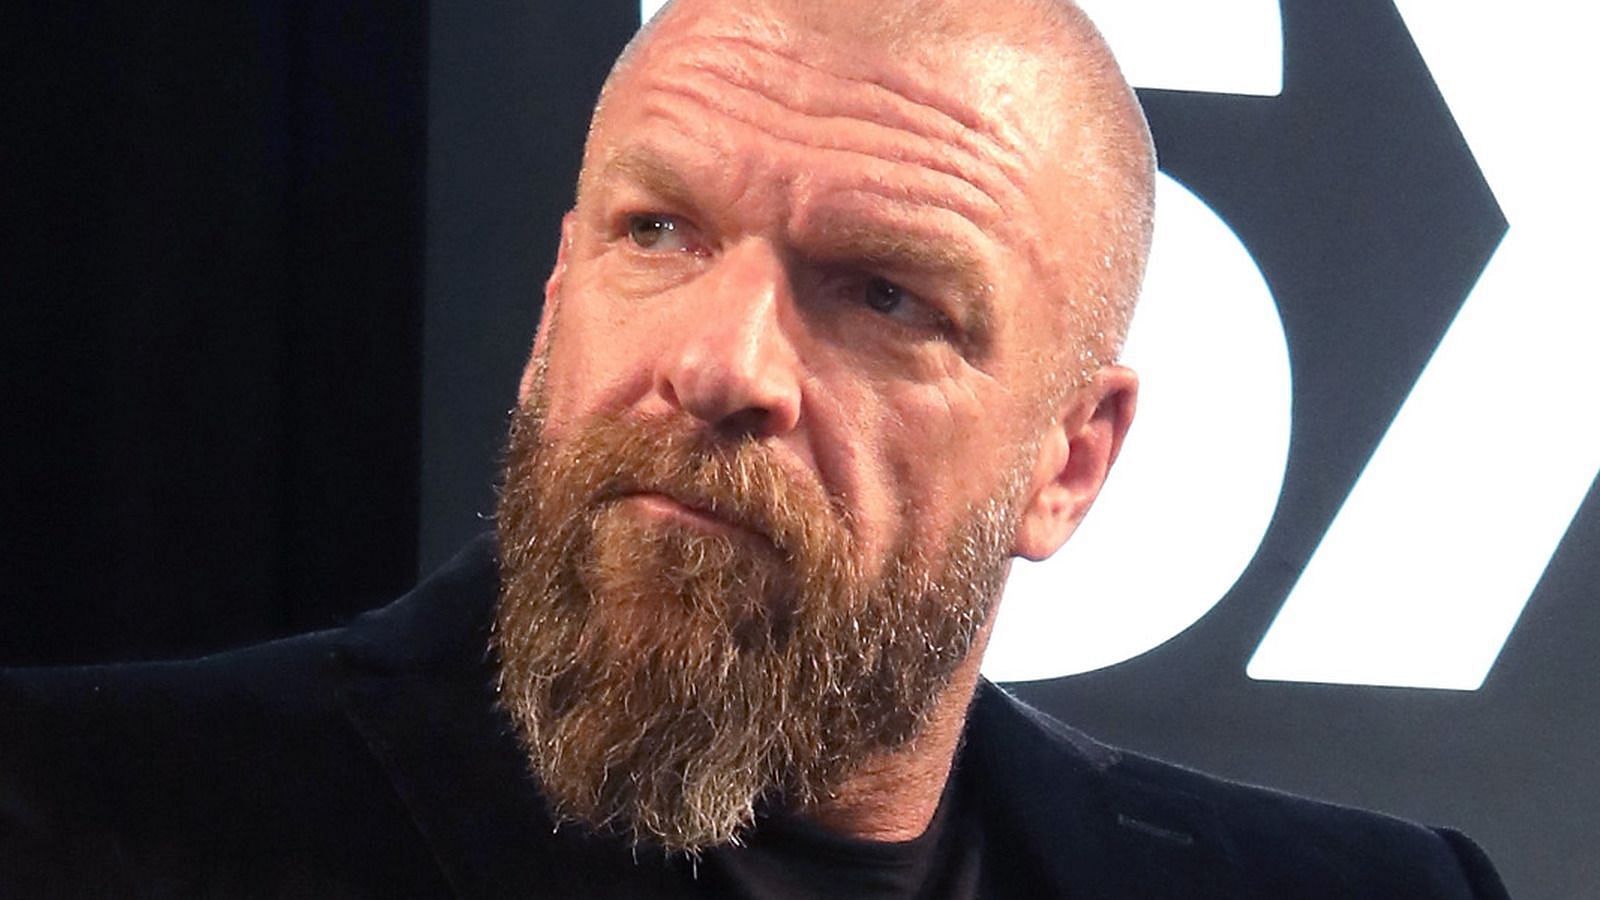 Triple H has hit the ground running as WWE